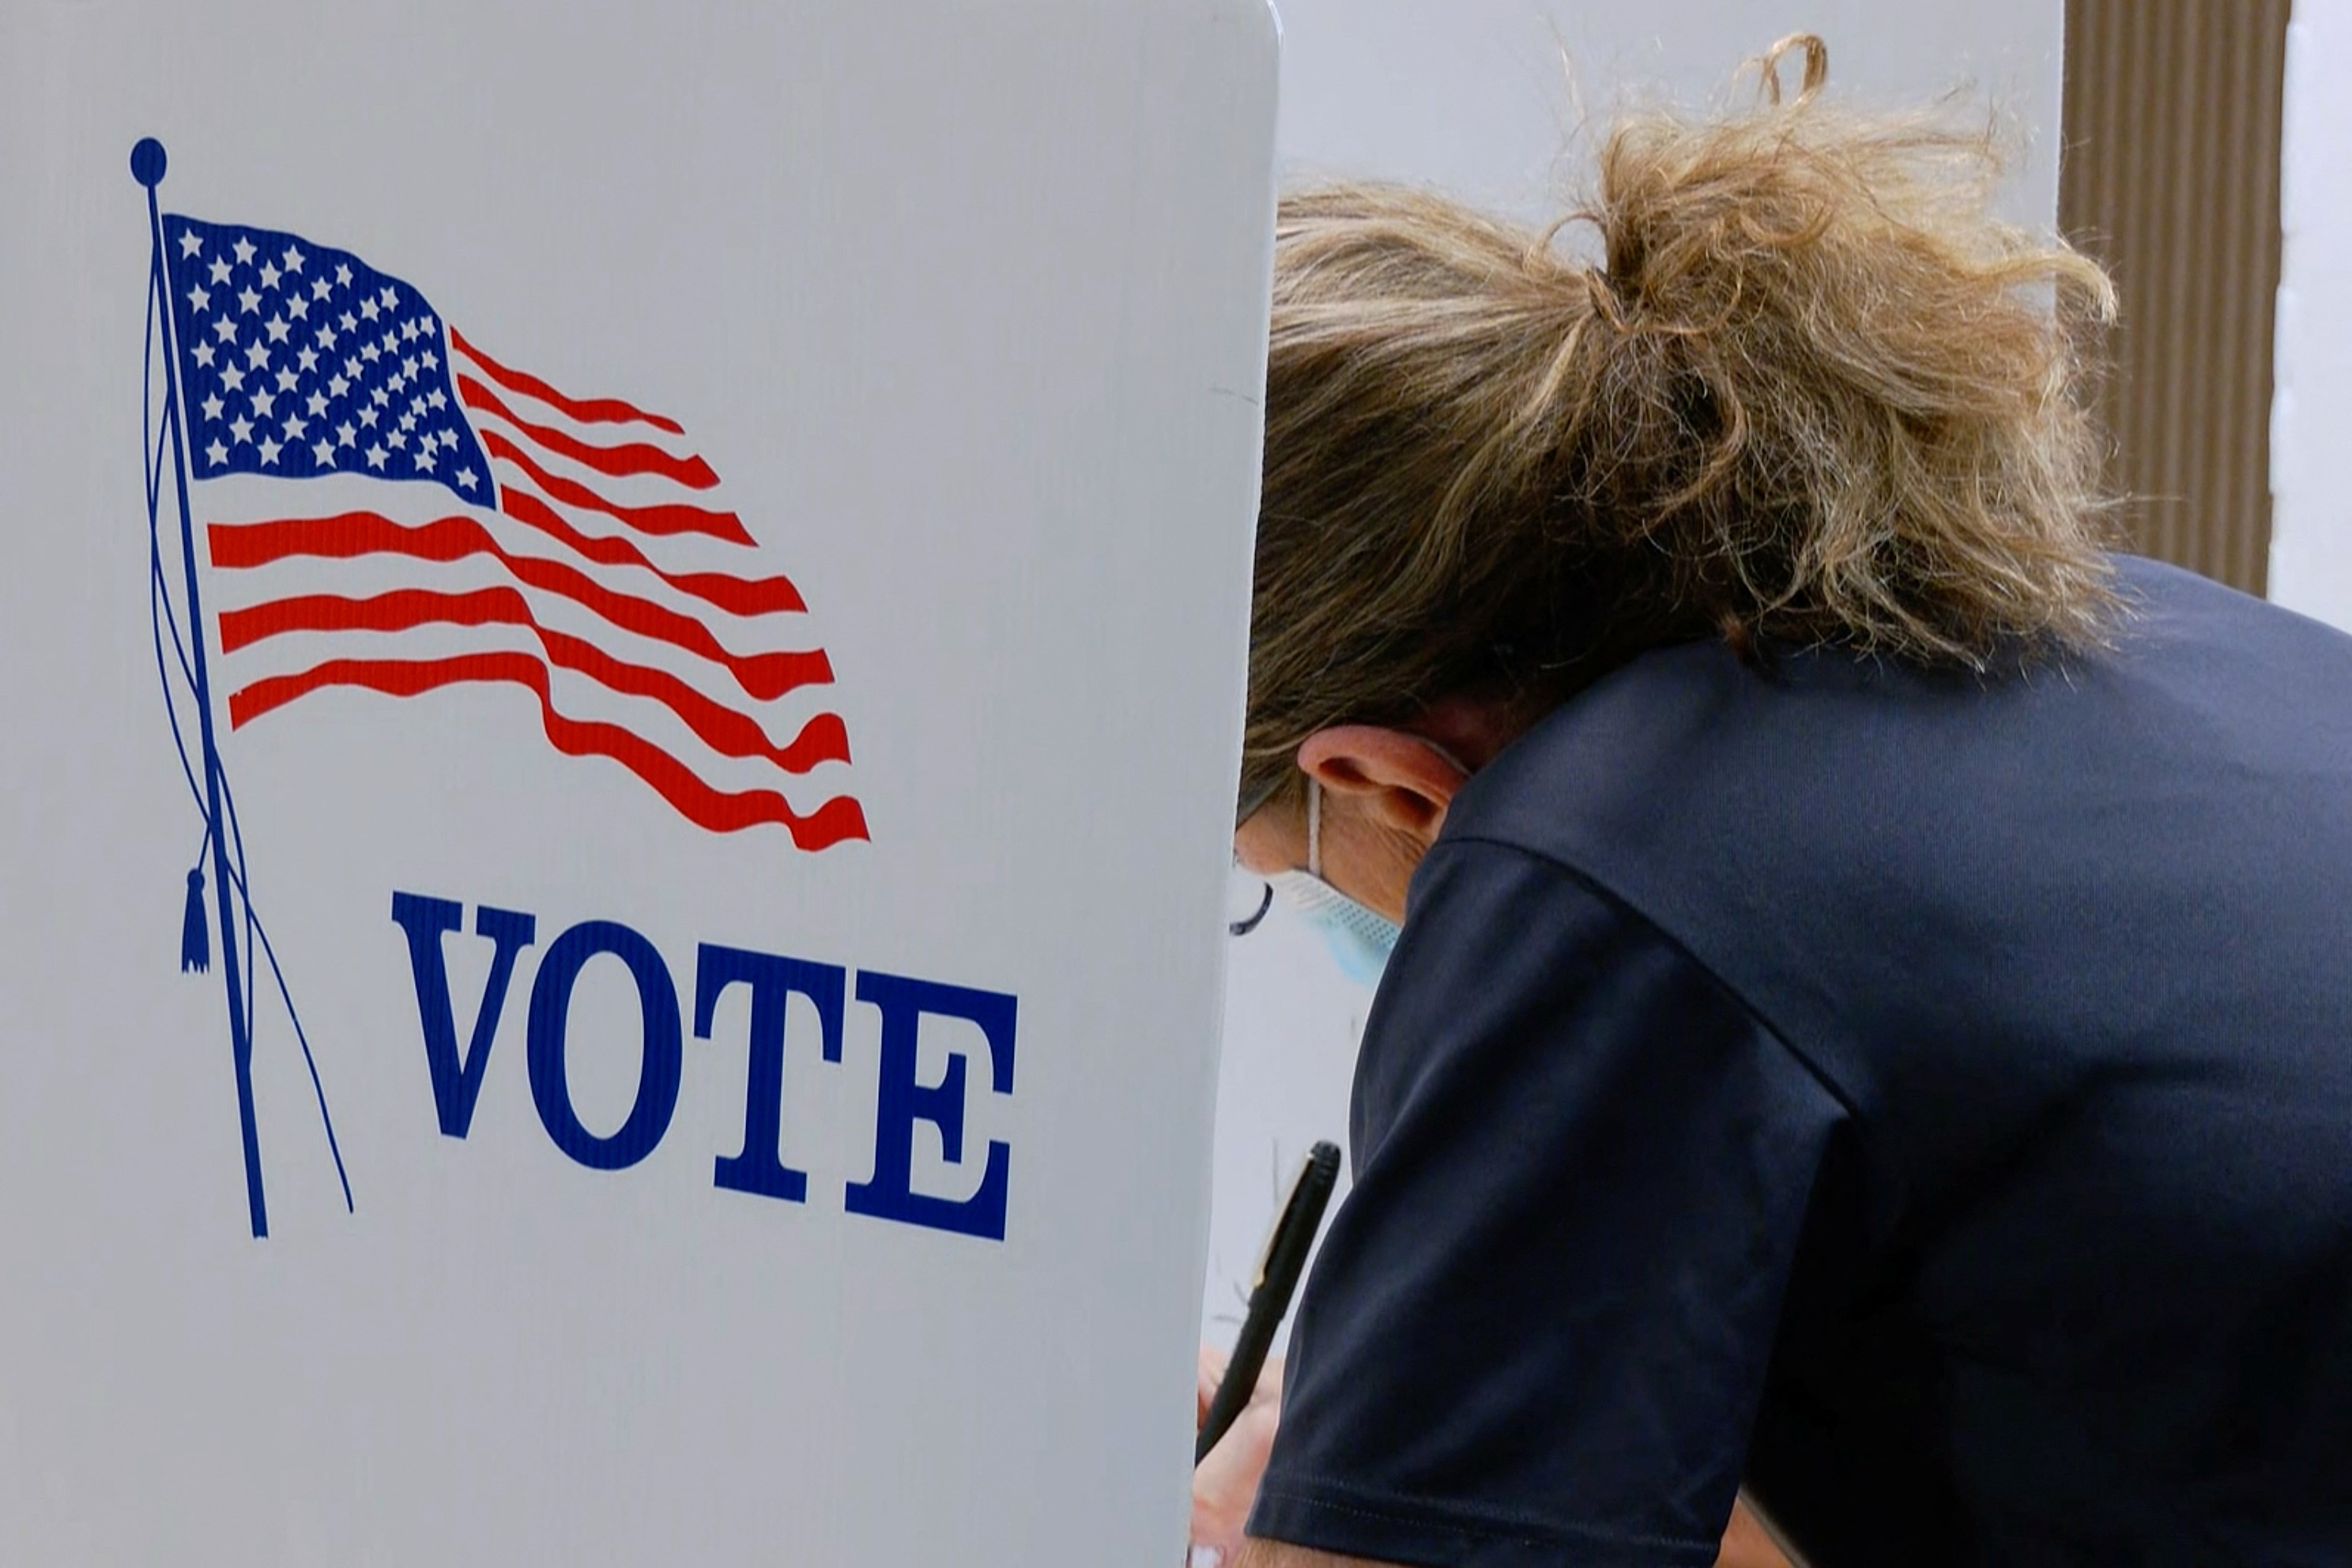 A voter marks a ballot during the primary election and abortion referendum at a Wyandotte County polling place in Kansas City, Kansas